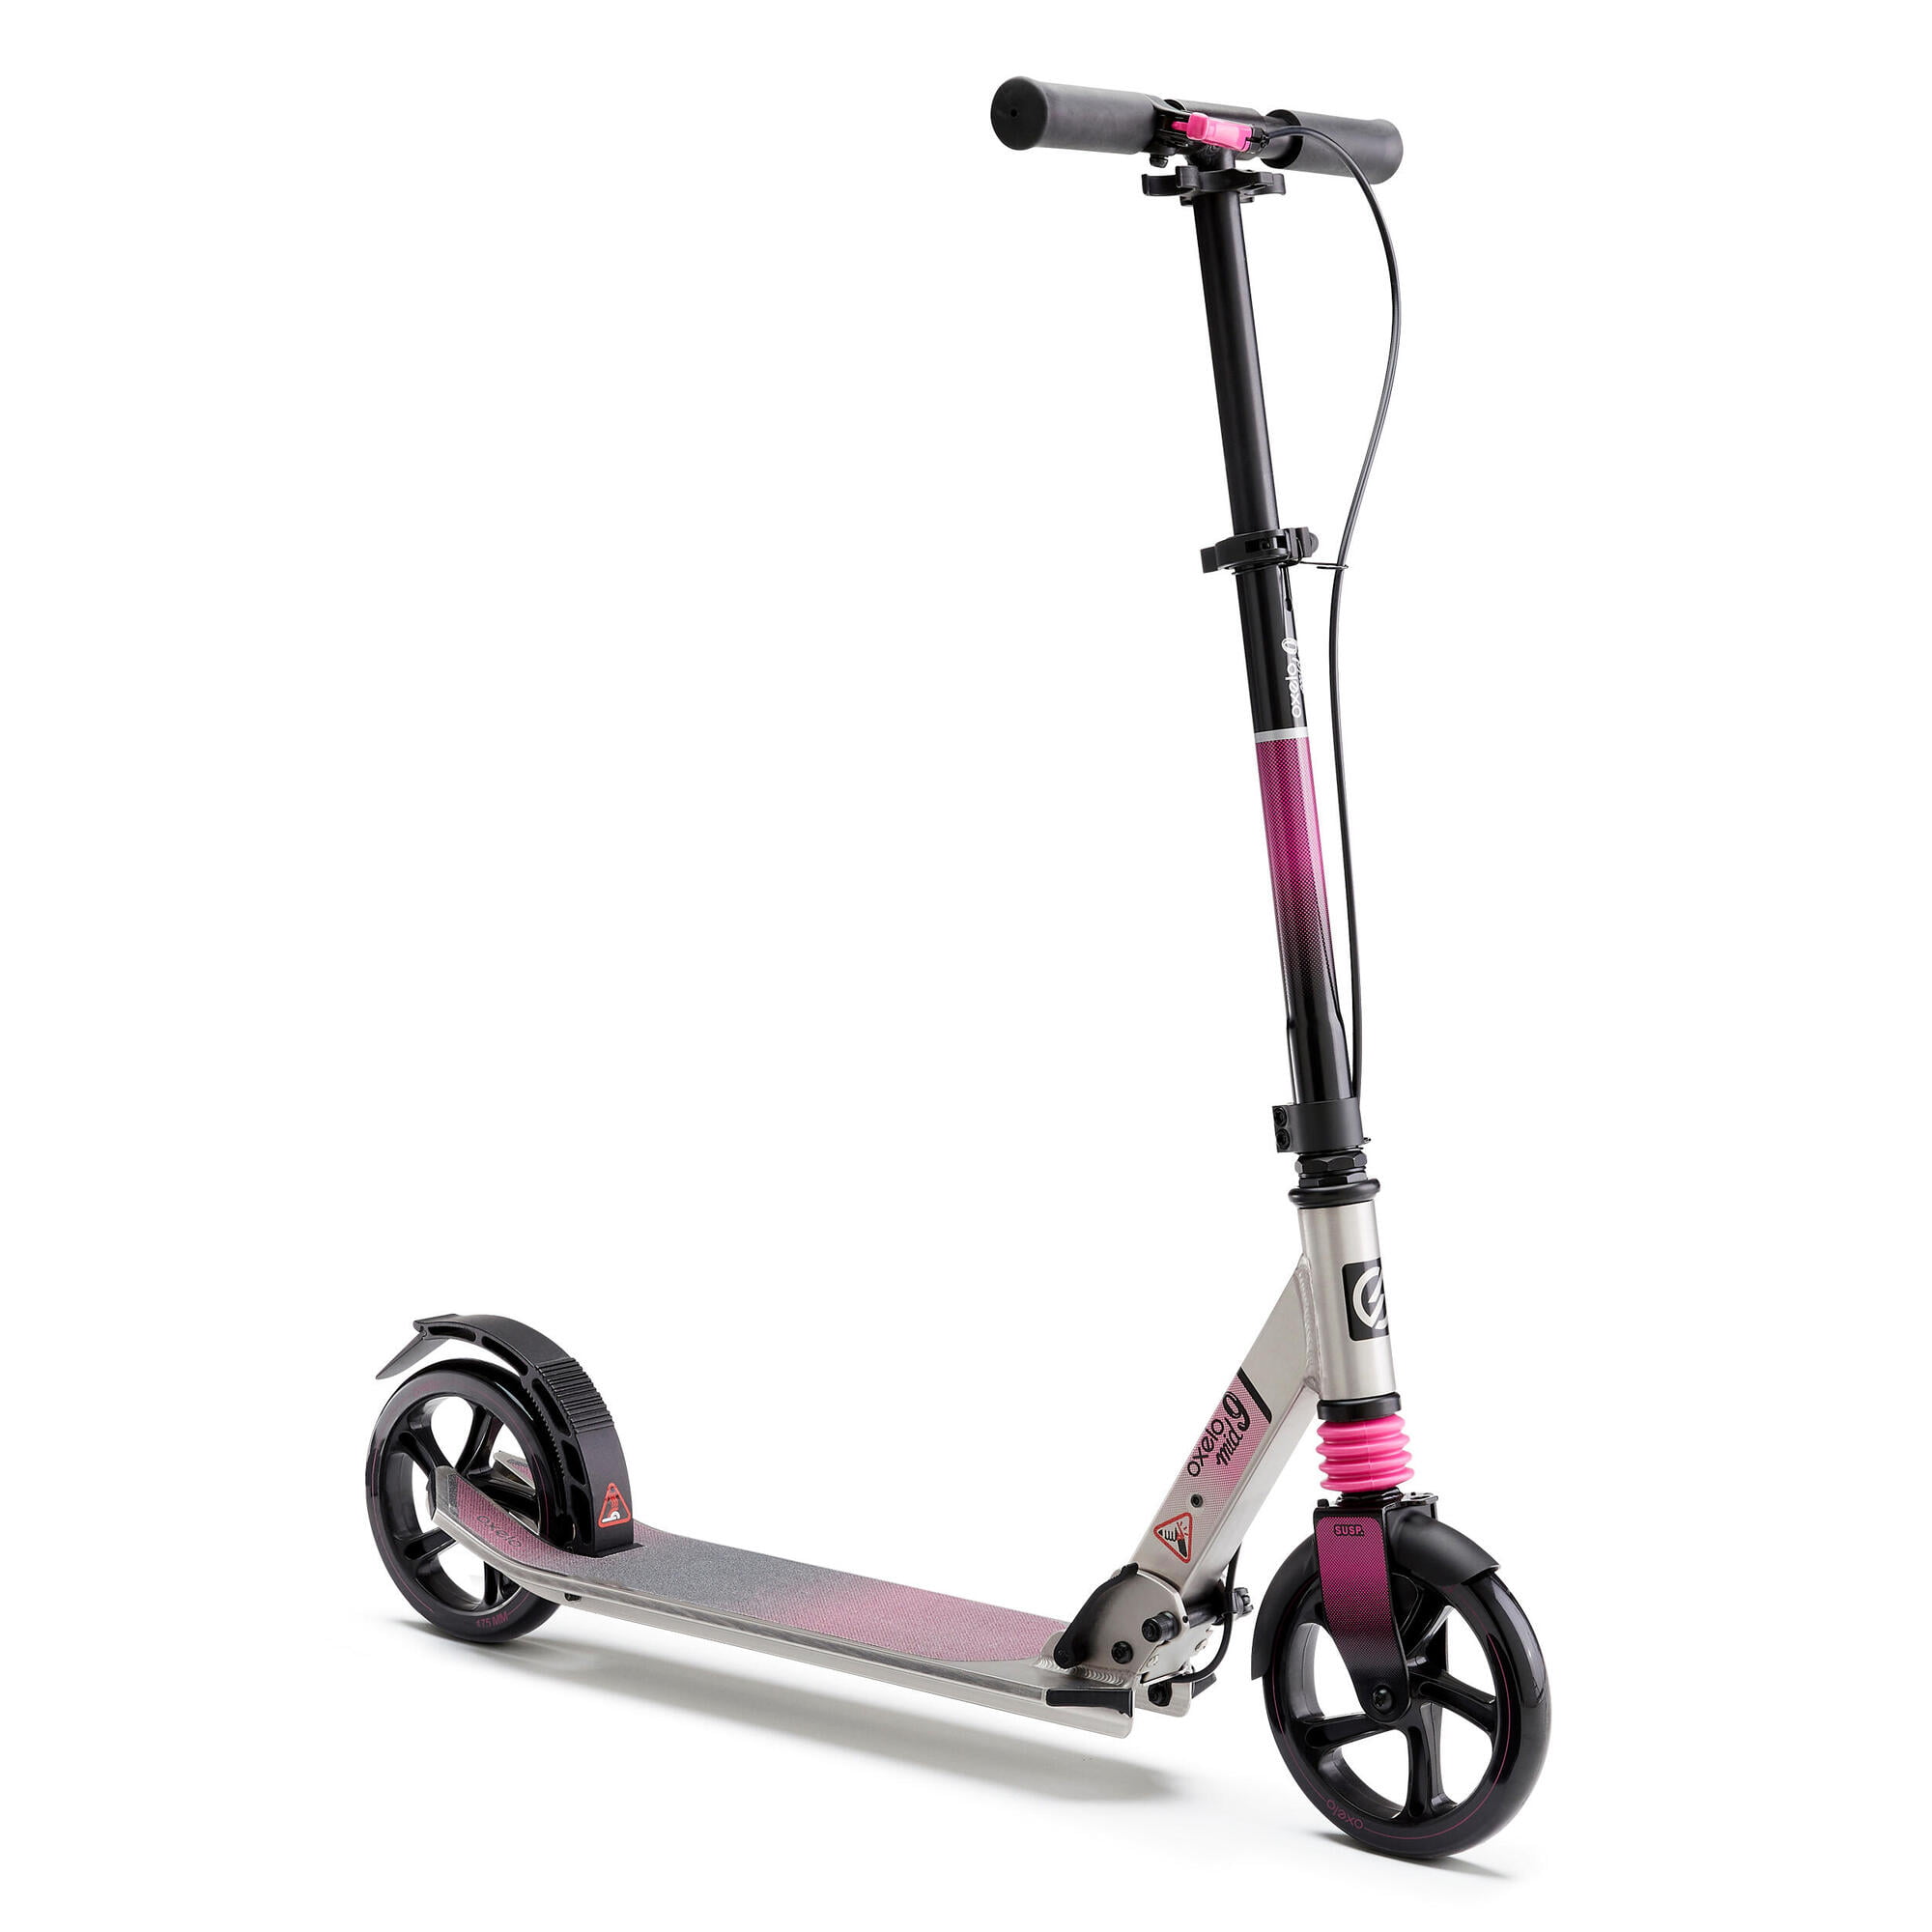 *BEST PRICE MID5 Kids' Scooter with Handlebar Brake and Suspension Indian Girl 